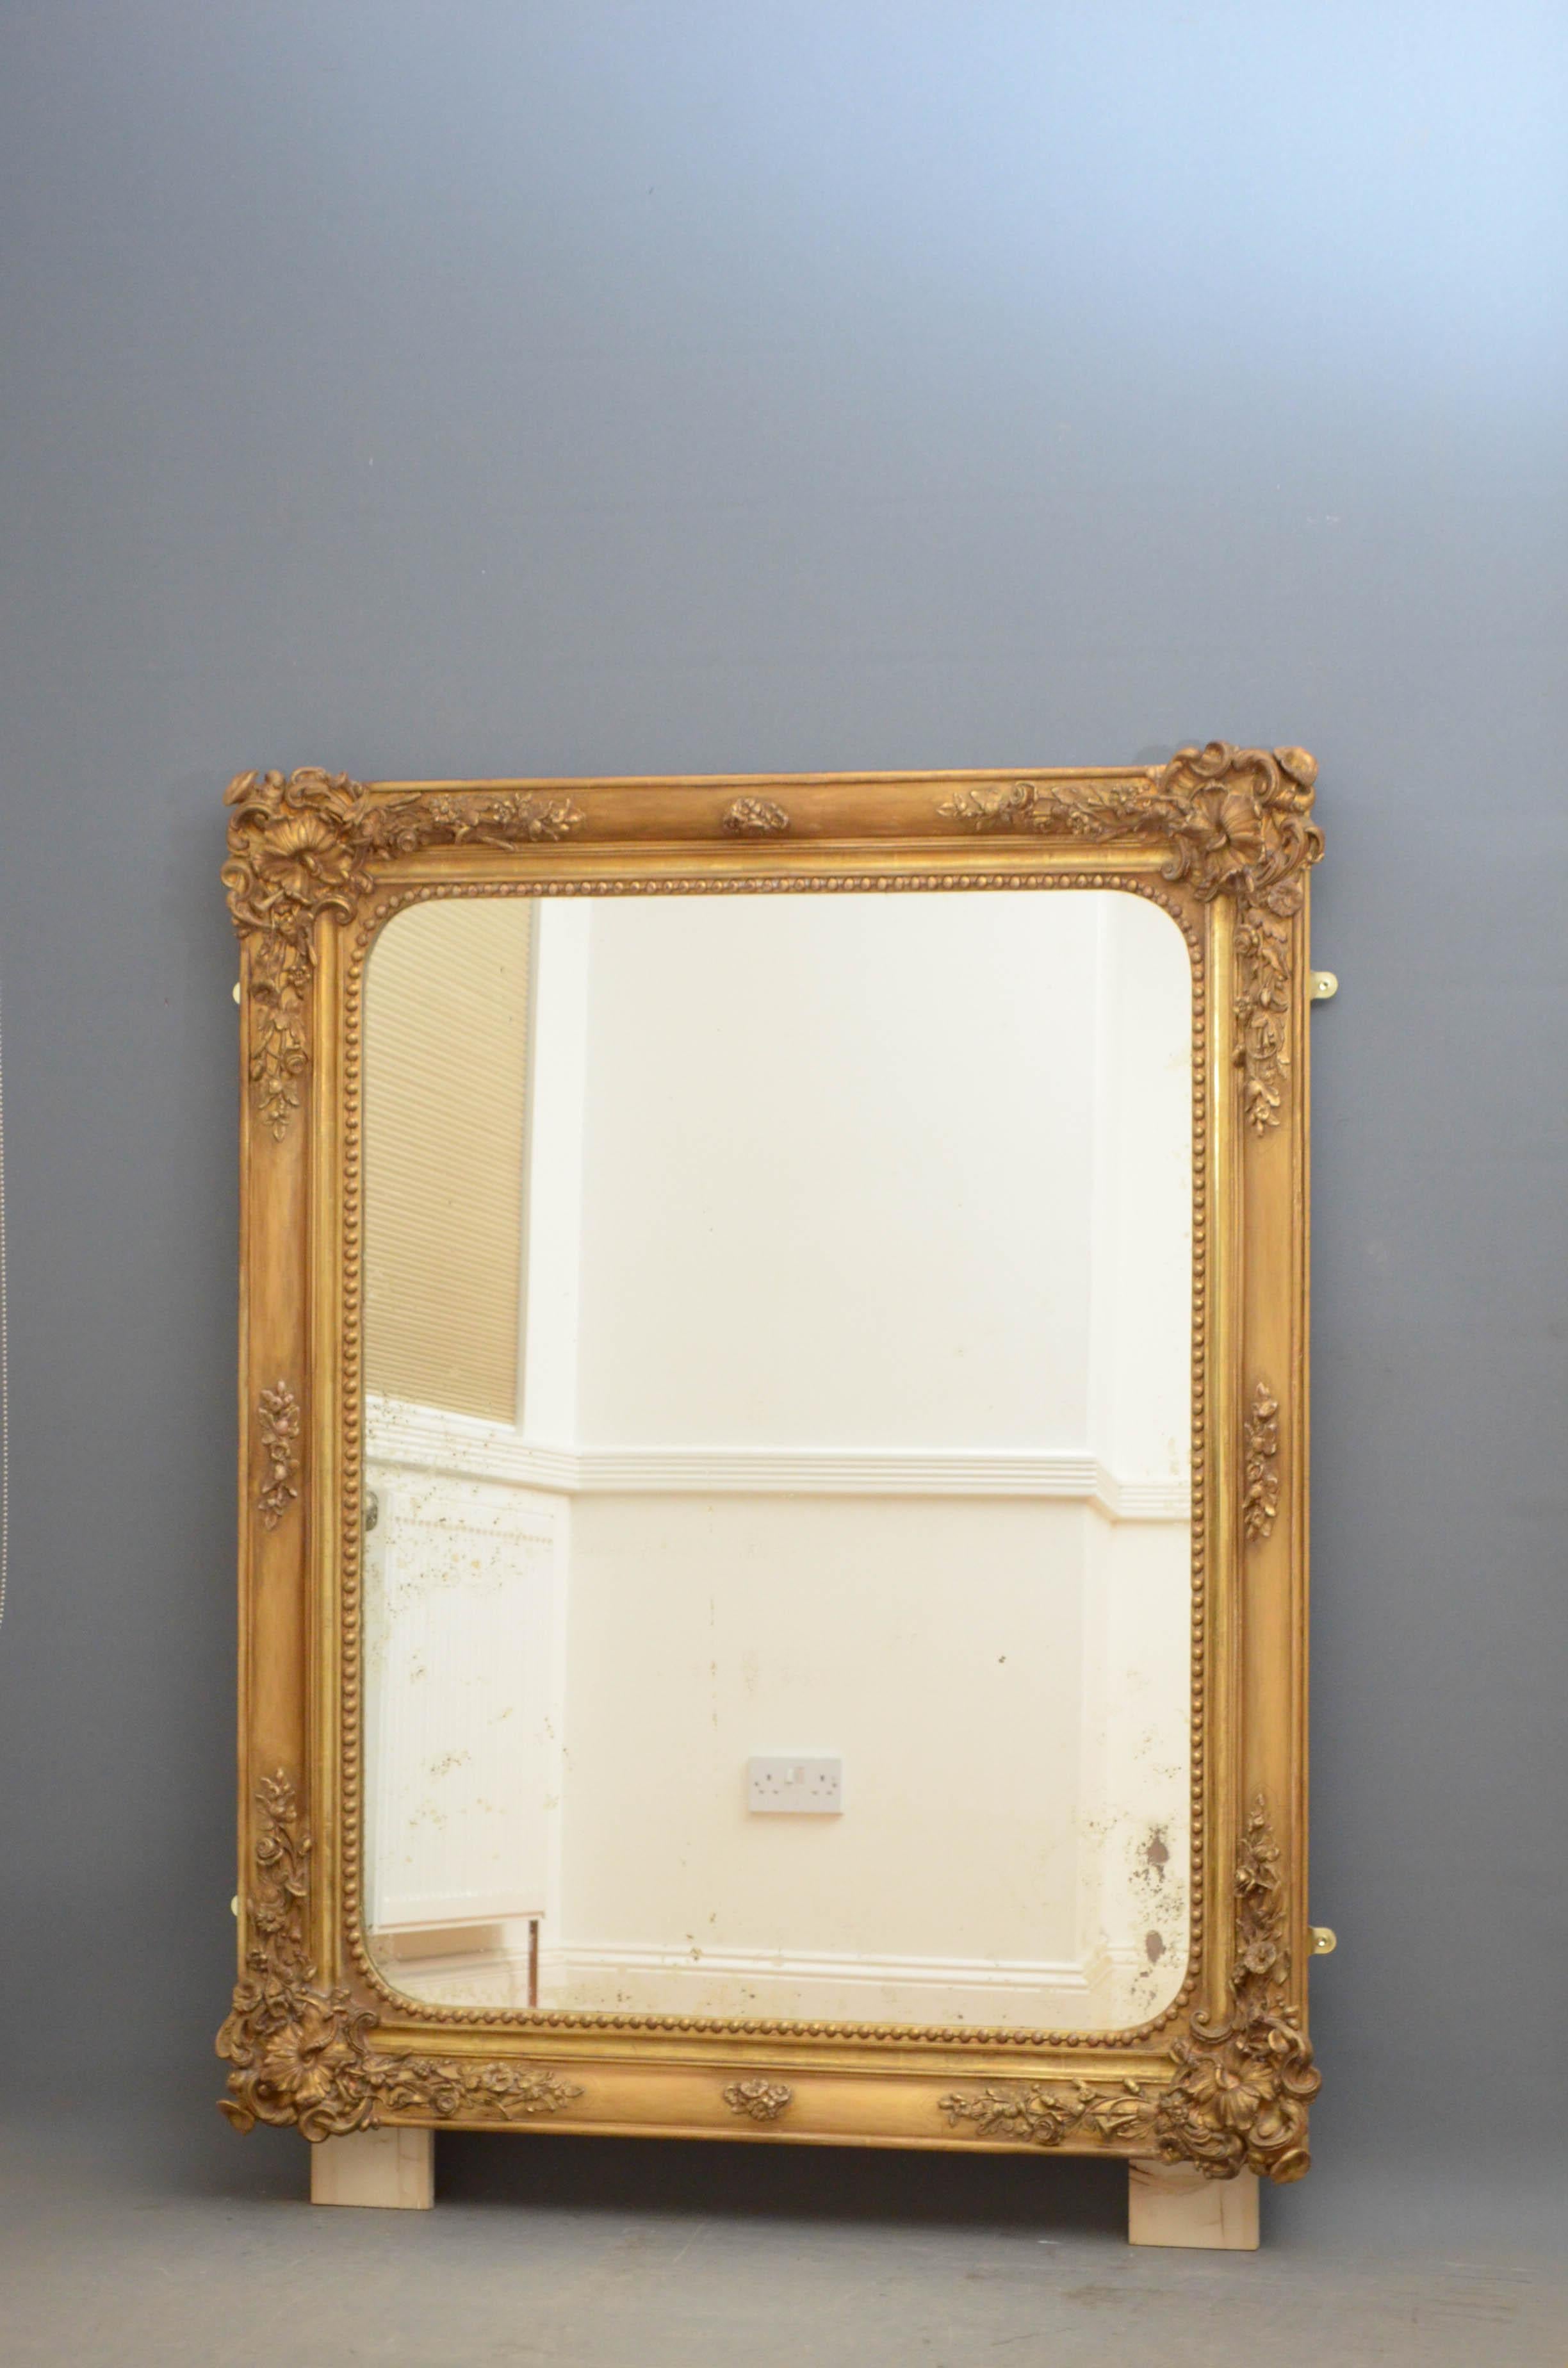 Sn4806 a large gilded wall mirror of versatile form, can be positioned portrait or horizontal way, with original foxed glass in beaded, moulded and floral decorated frame, all in excellent original condition throughout, circa 1860.
  